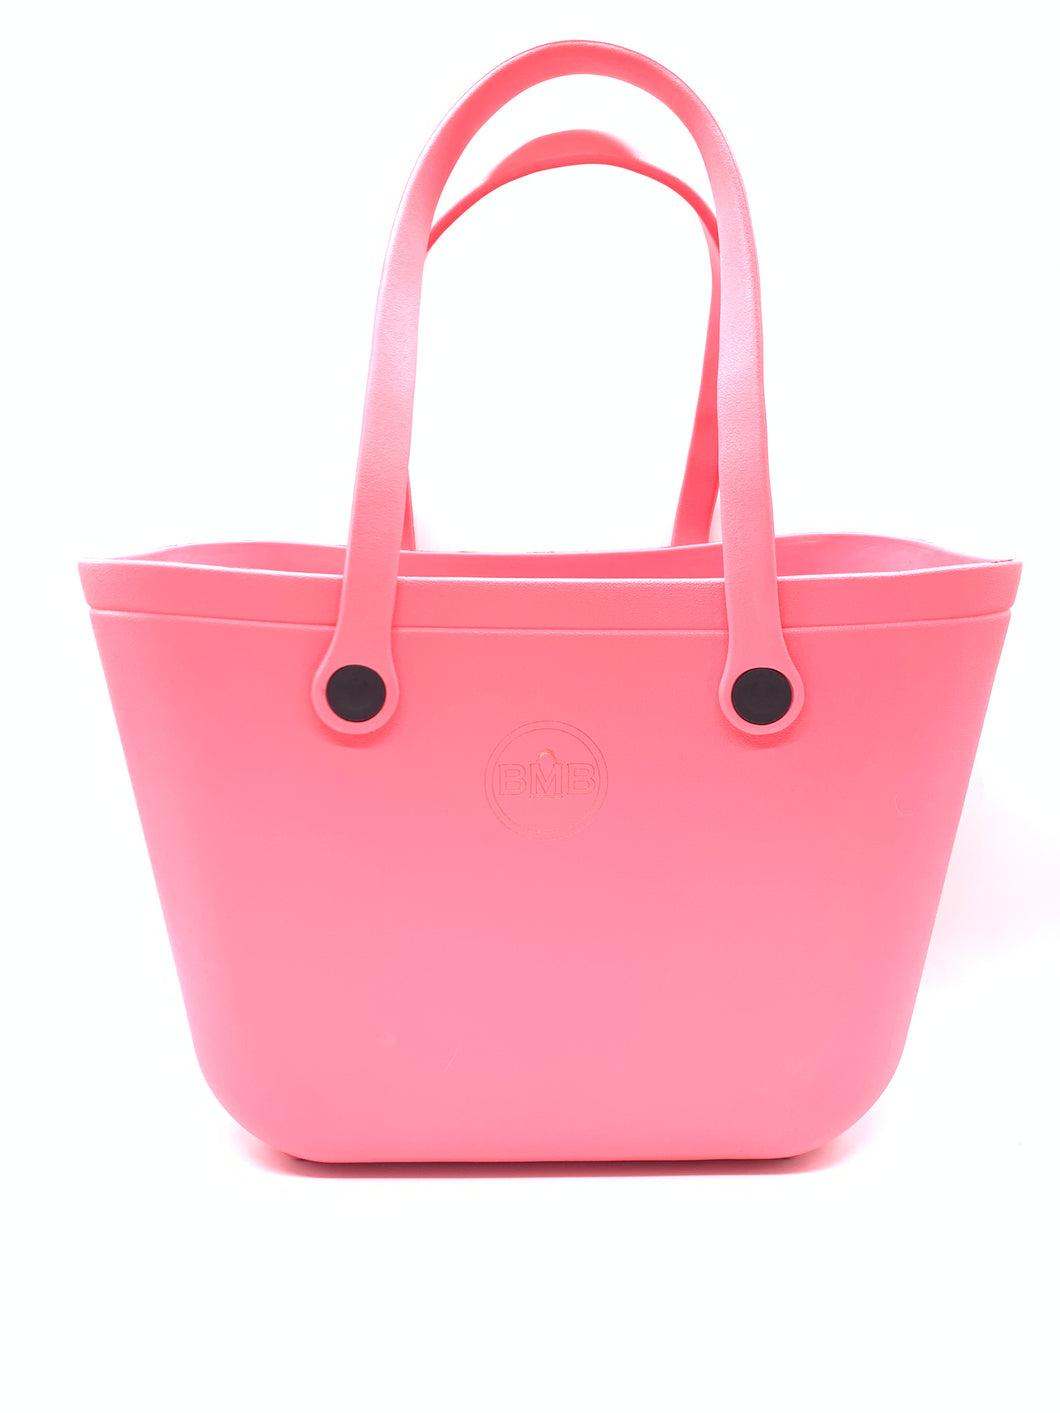 Be Me “Beach” Extra Large Tote- Coral